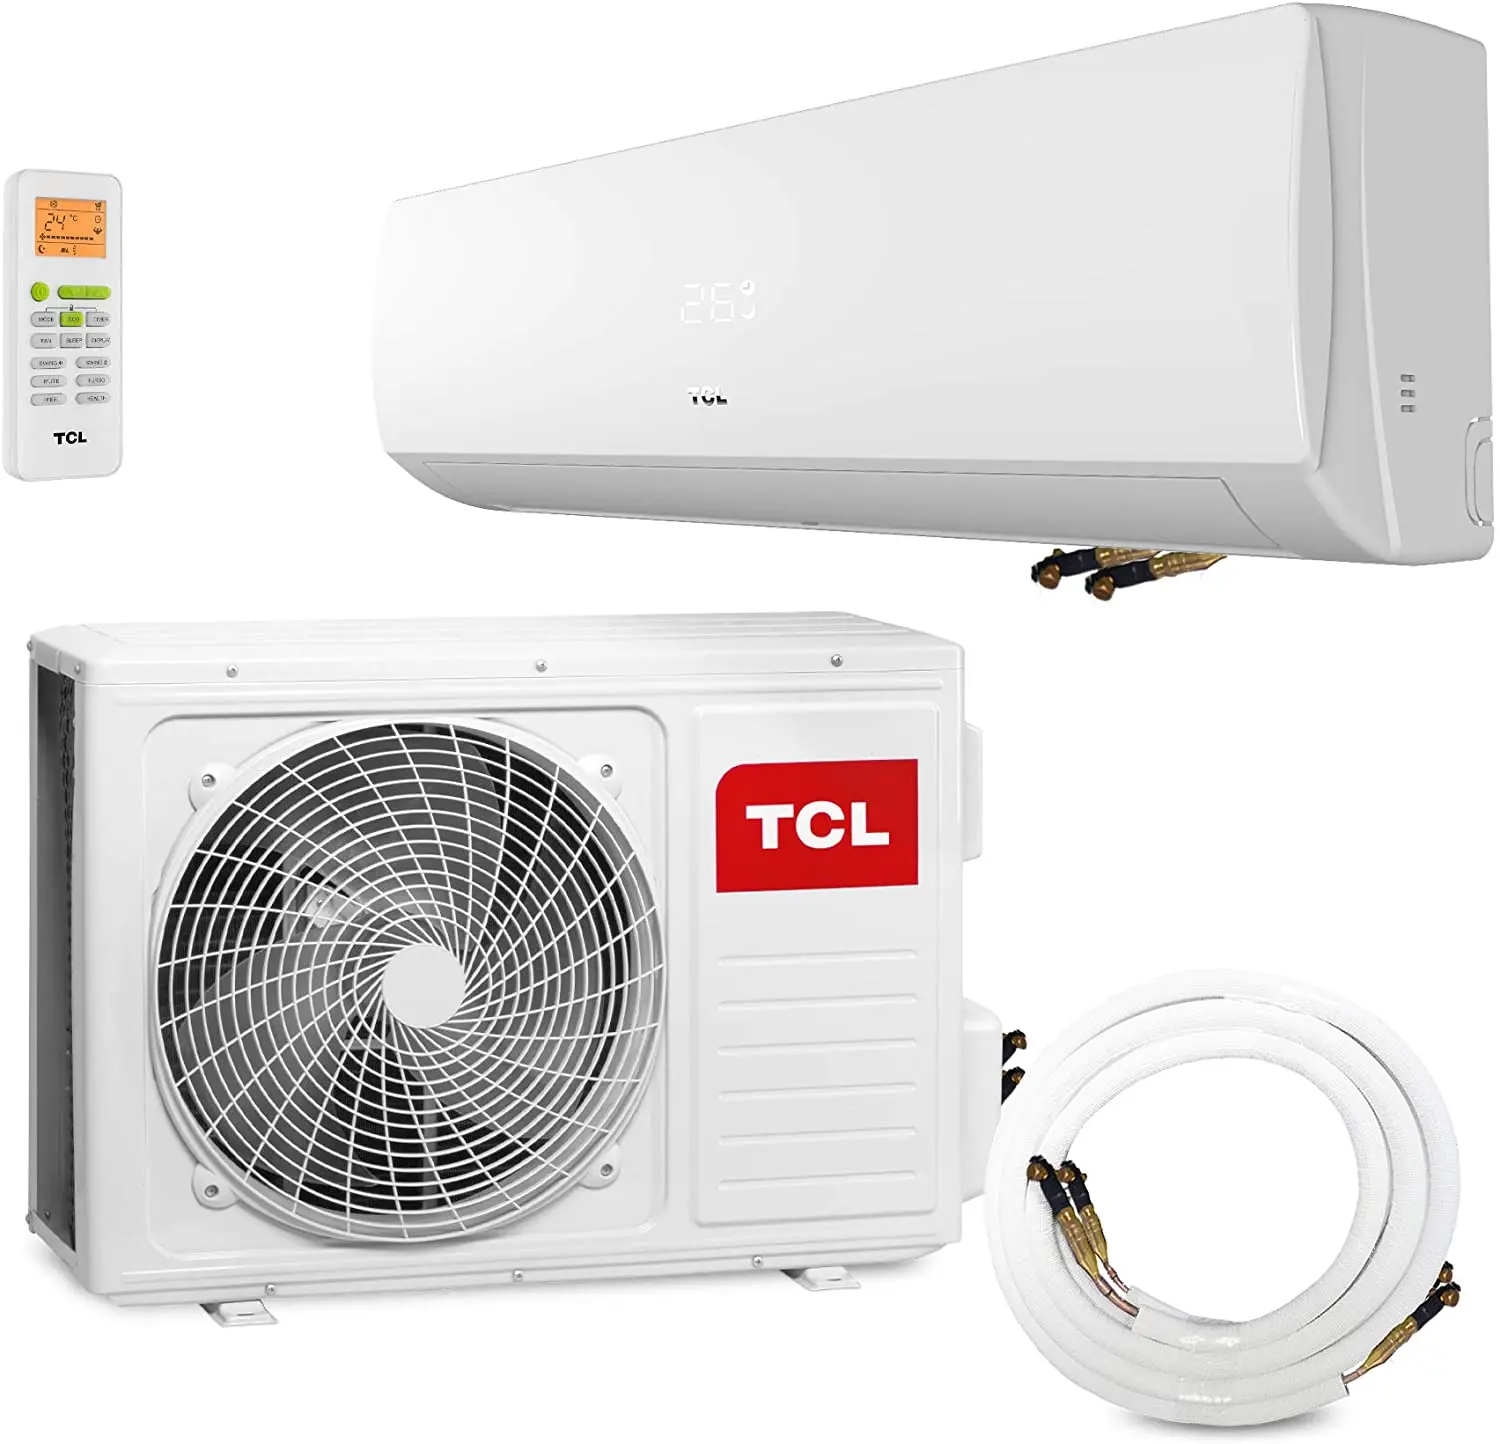 How Good is Tcl Air Conditioner 